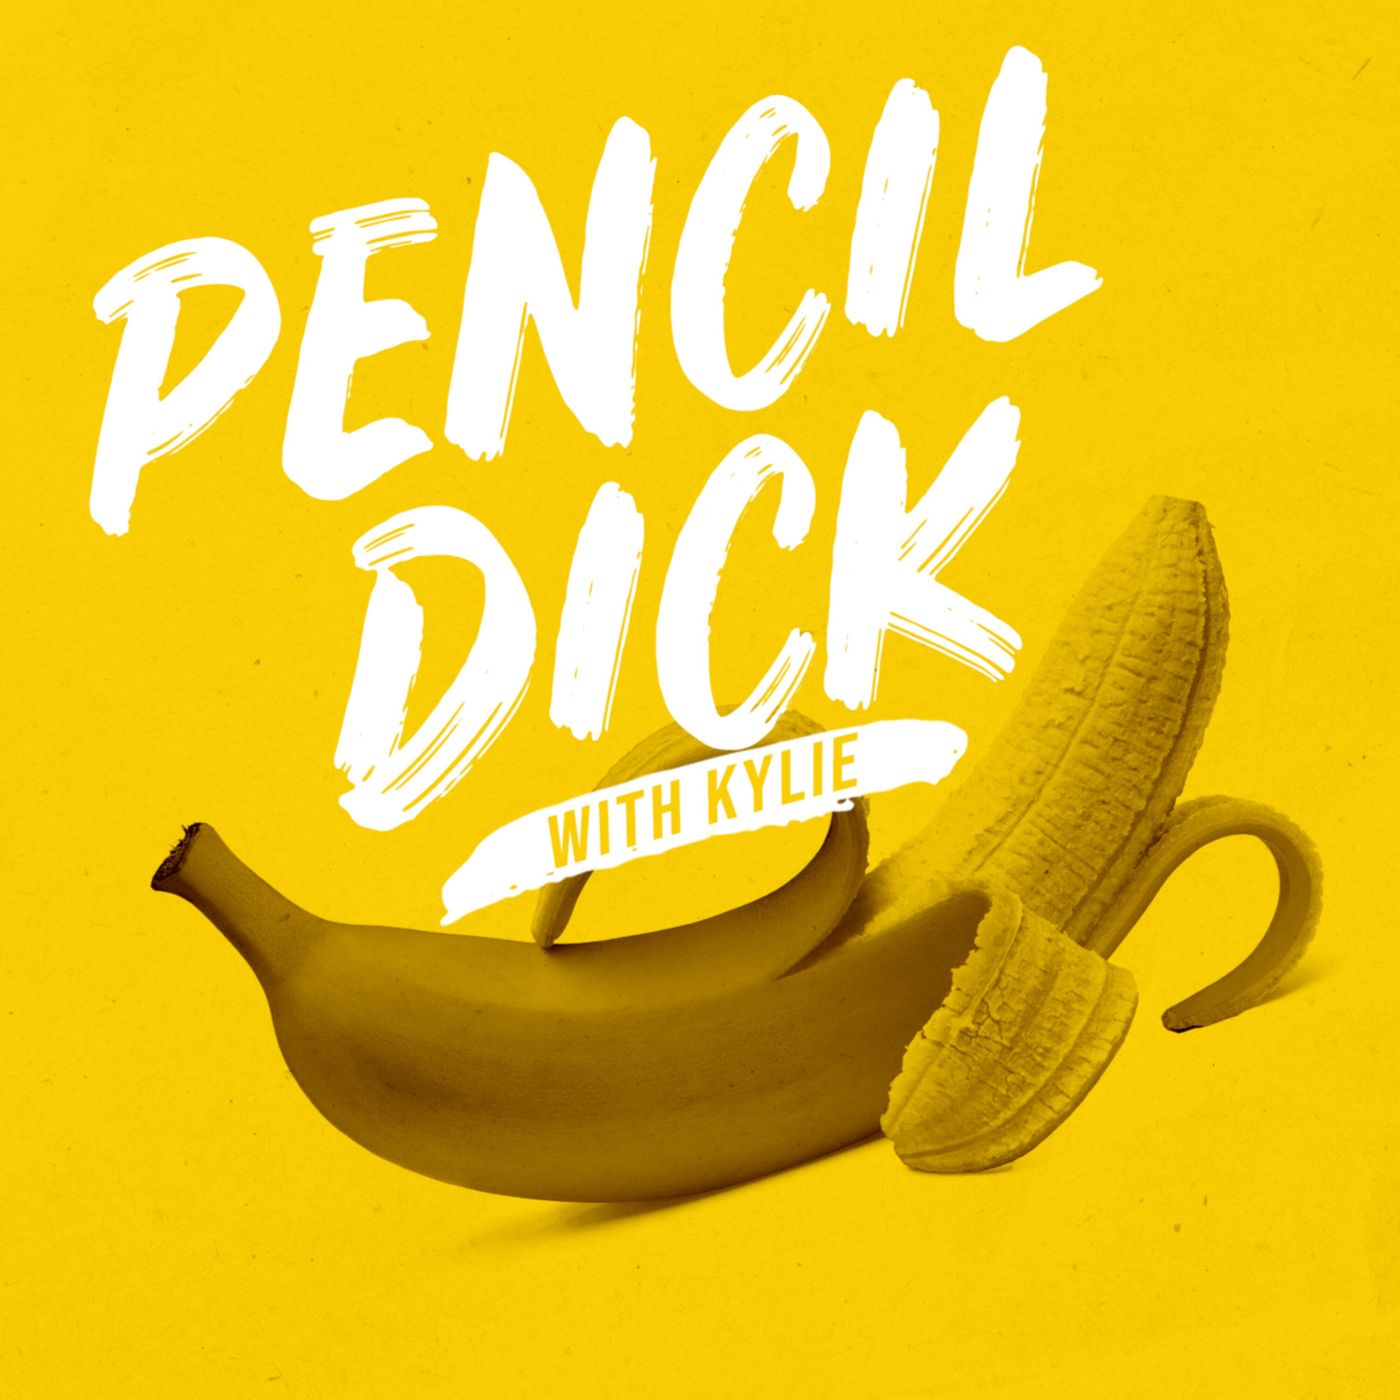 Pencil Dick with Kylie